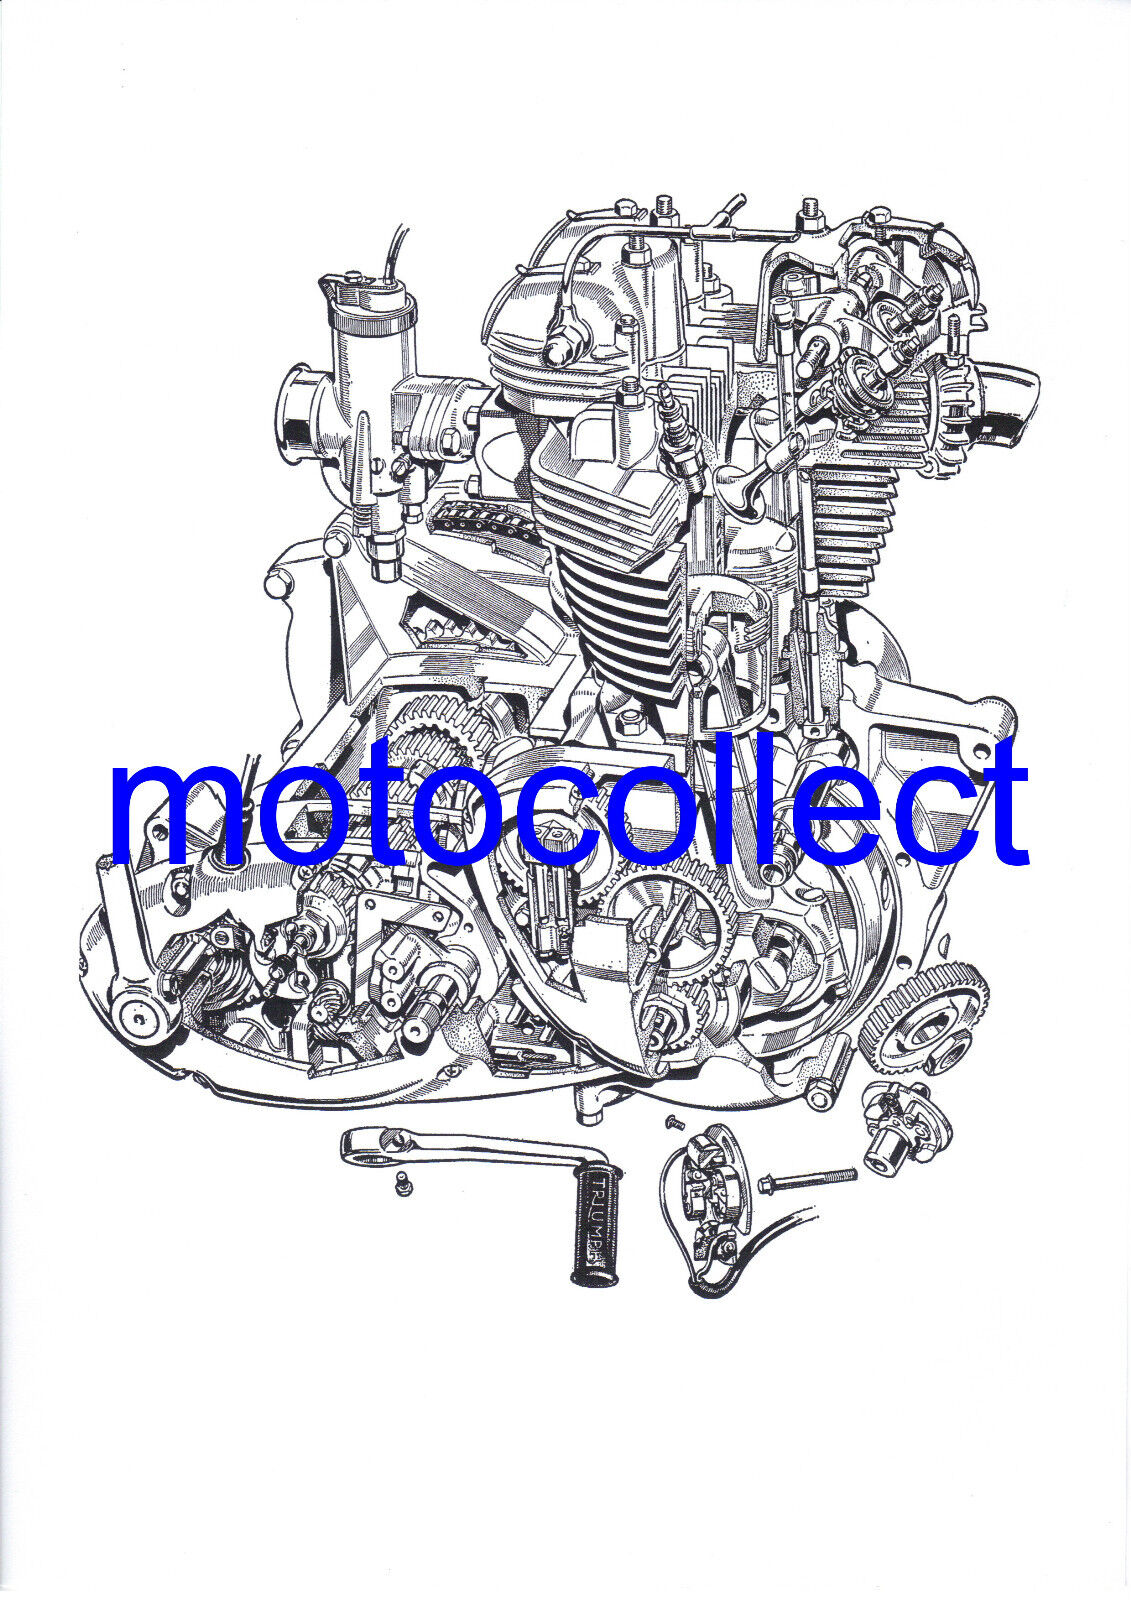 TRIUMPH 650 Unit Engine - Exploded View A3 print - Free Postage to UK